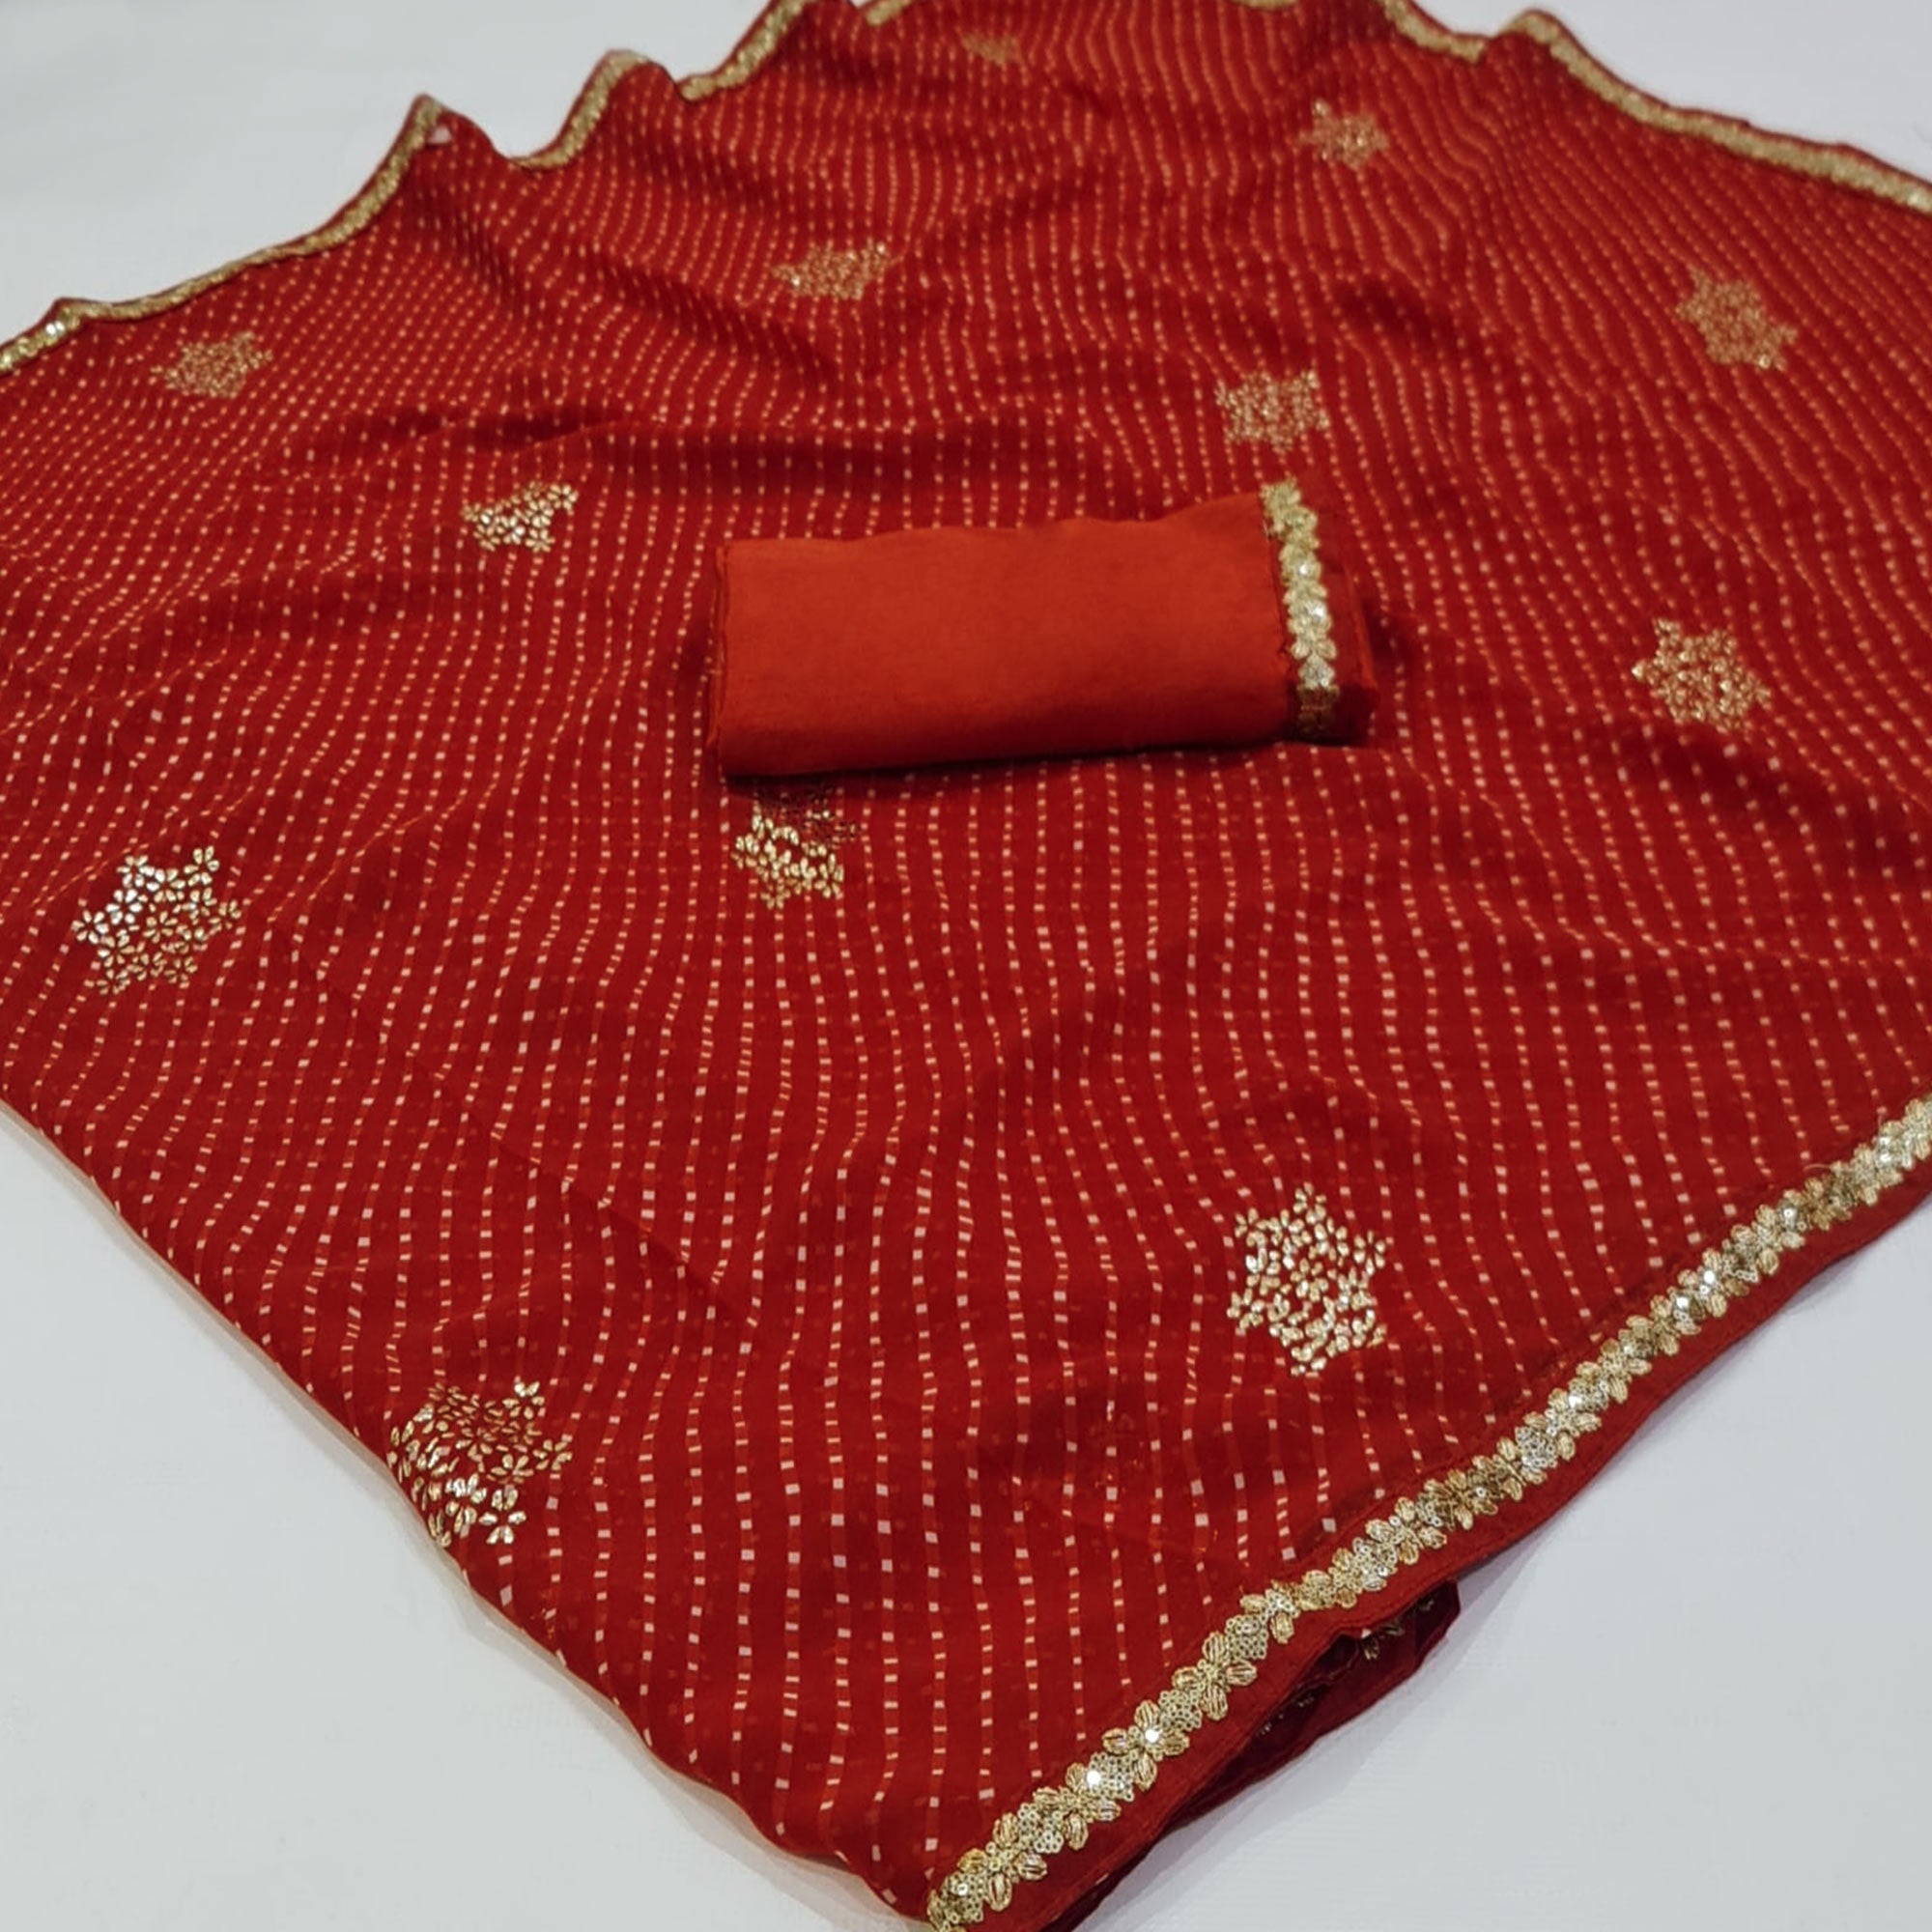 Red Printed Georgette Saree With lace Border